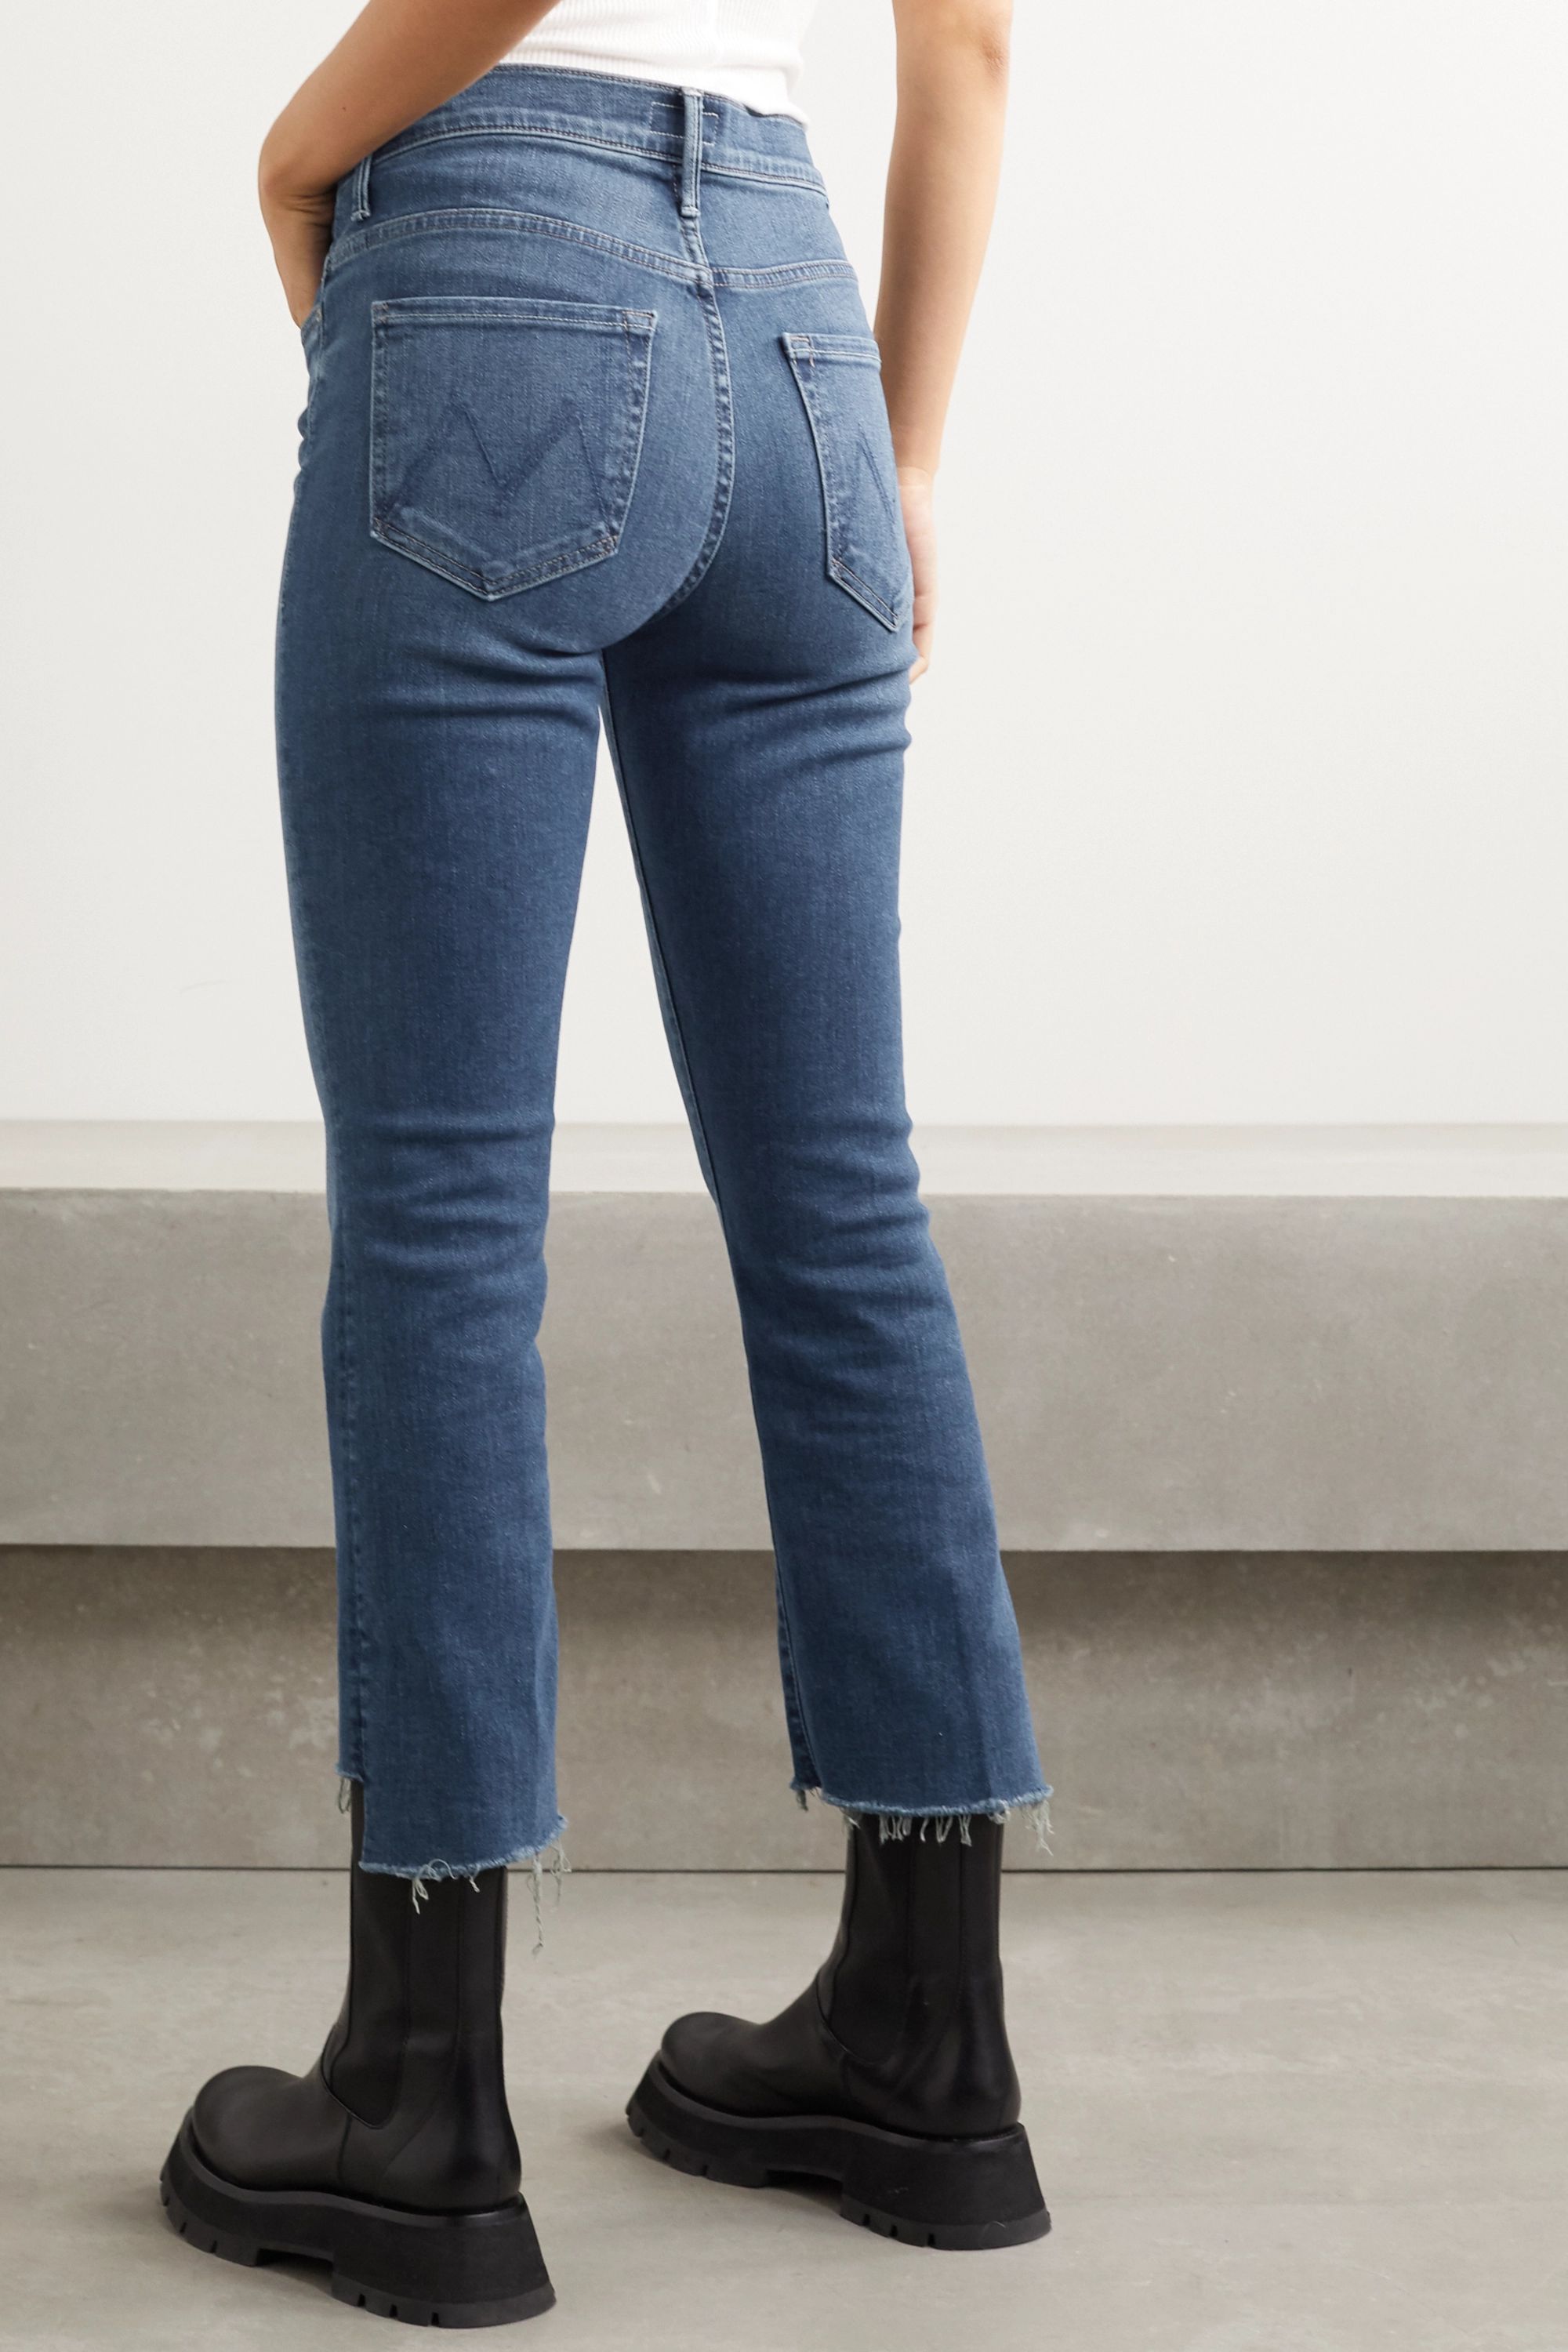 high waisted jeans with small pockets